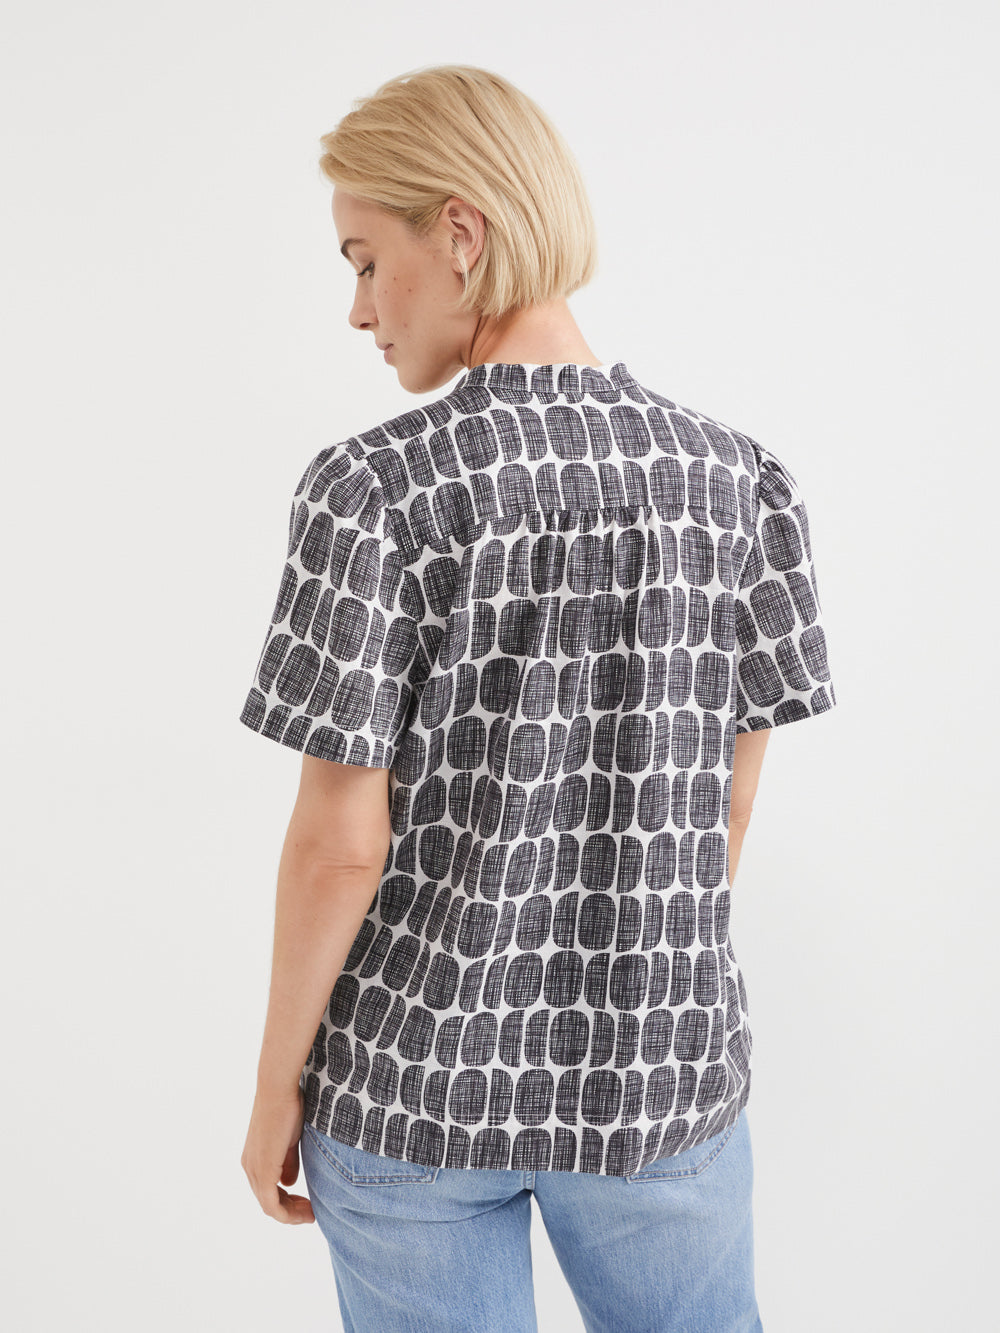 The Etched Print Linen Top